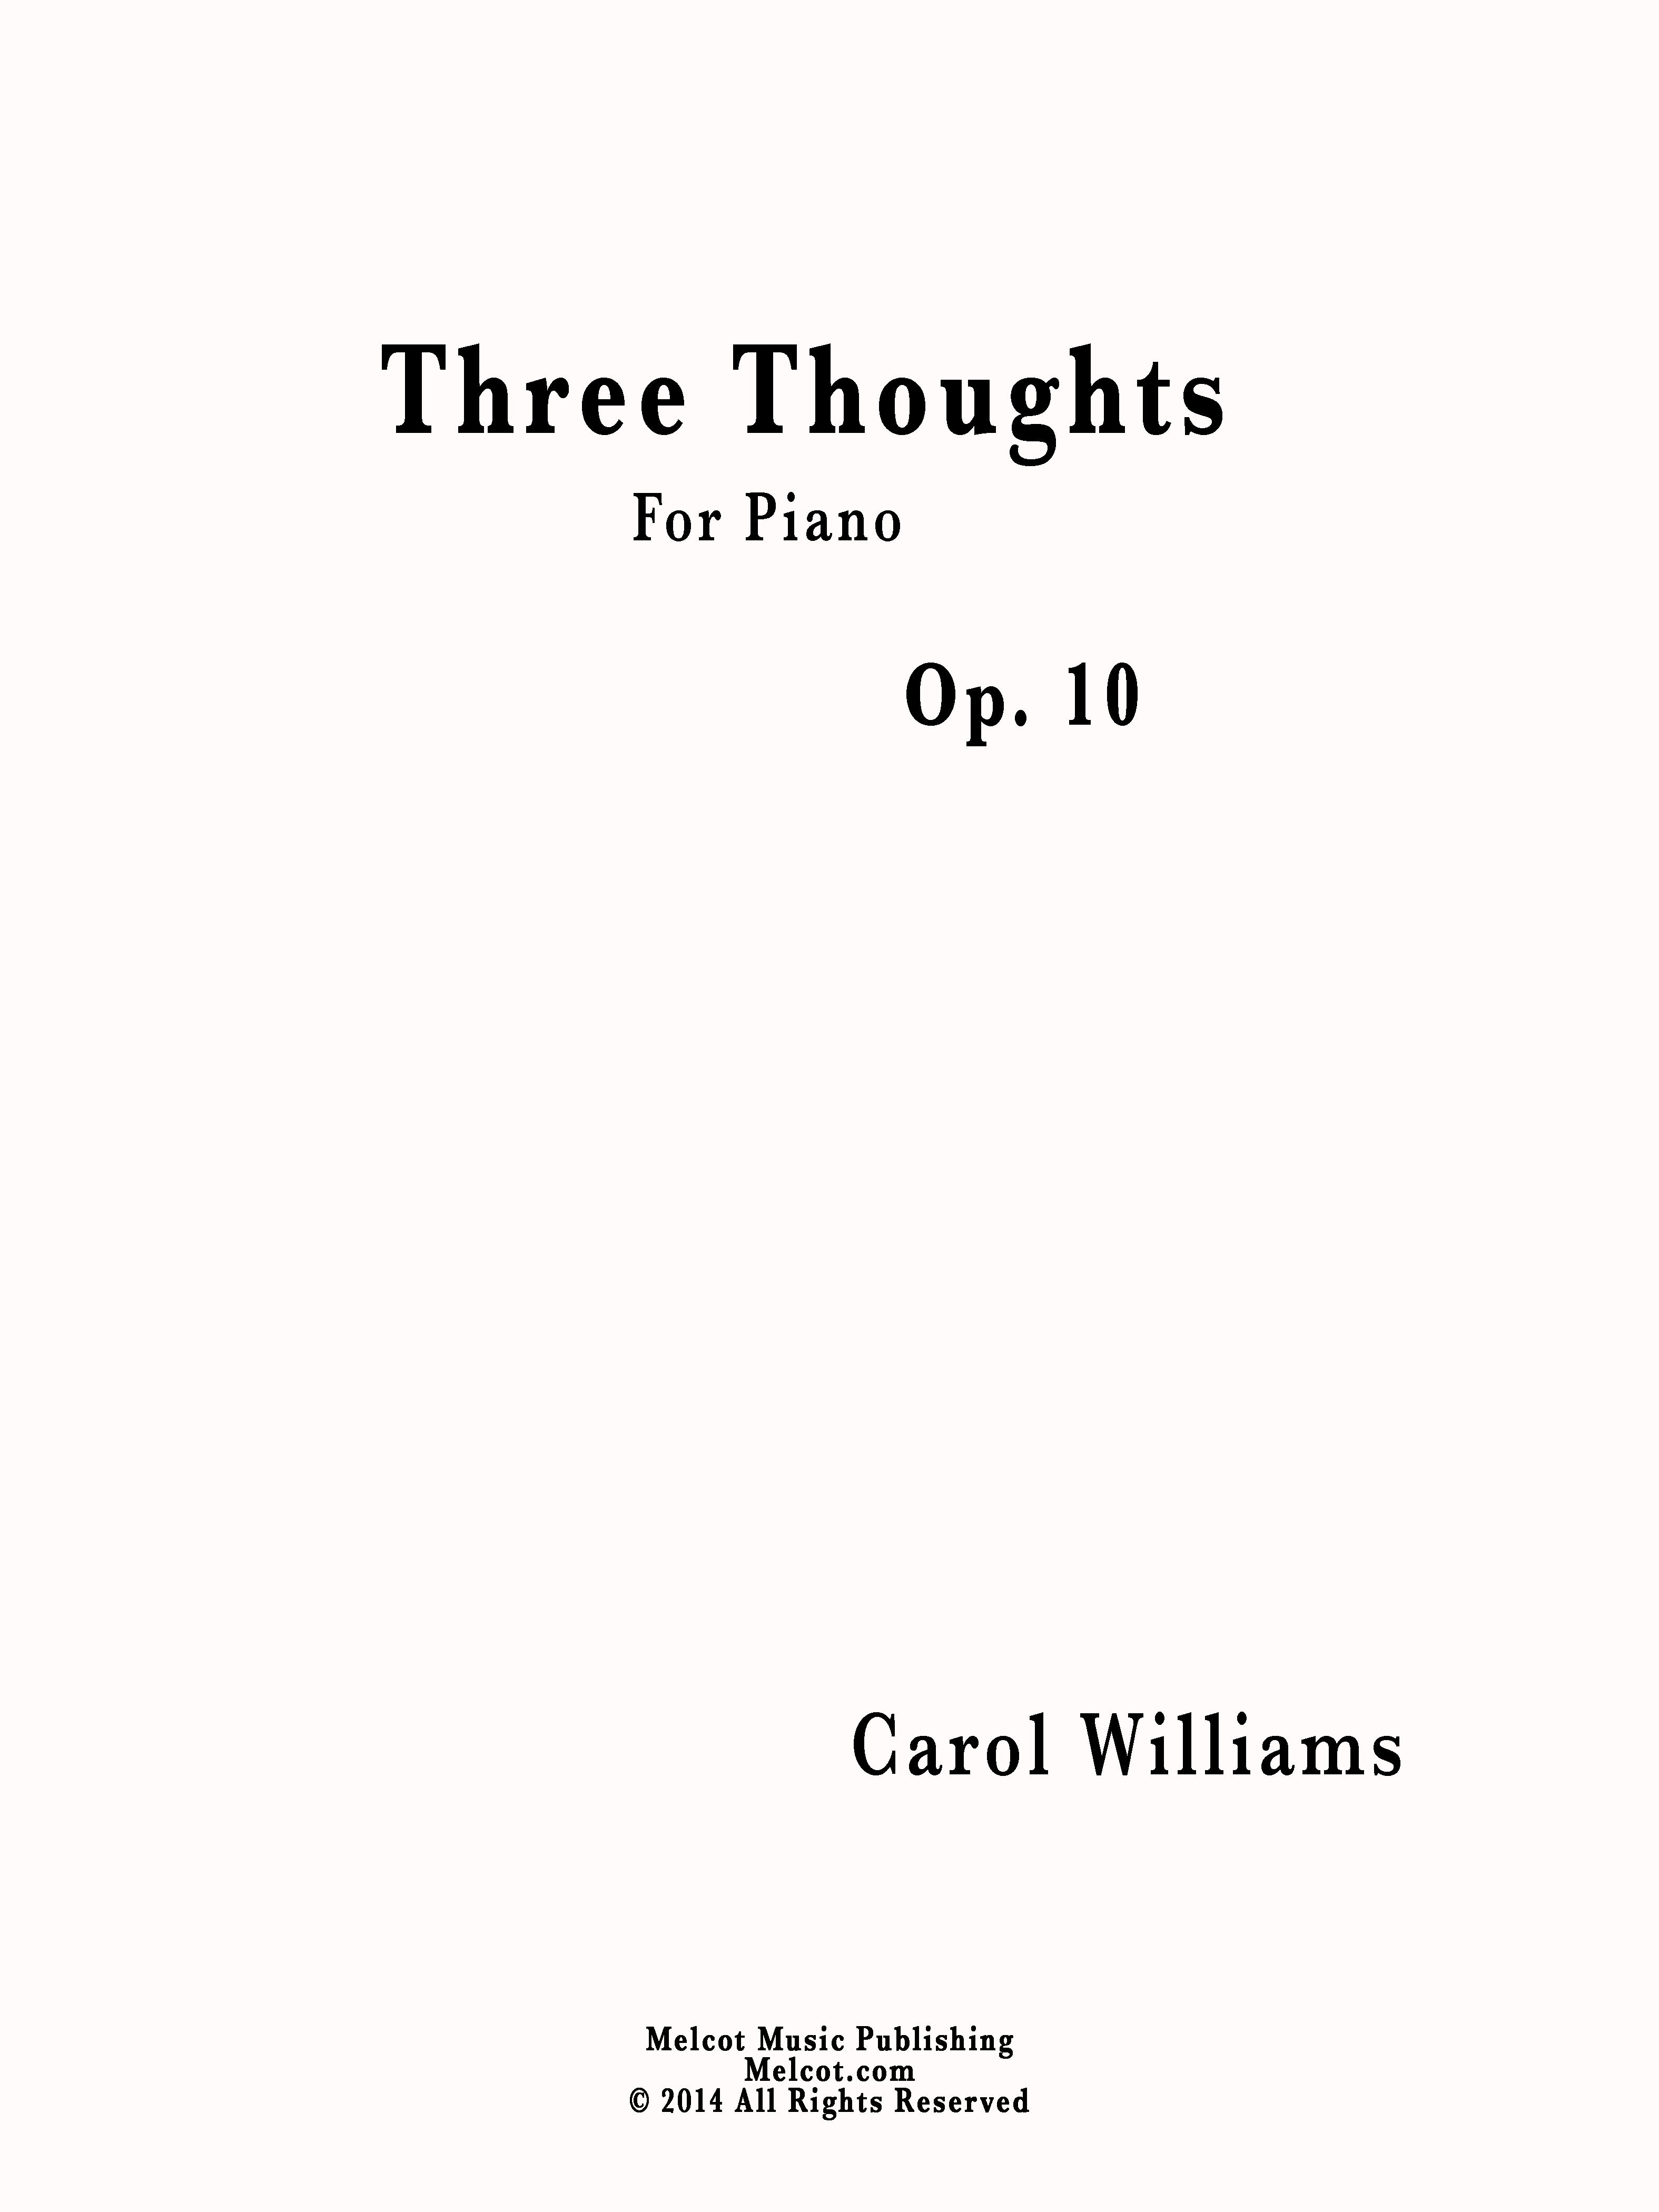 Three Thoughts by Carol
                                    Williams